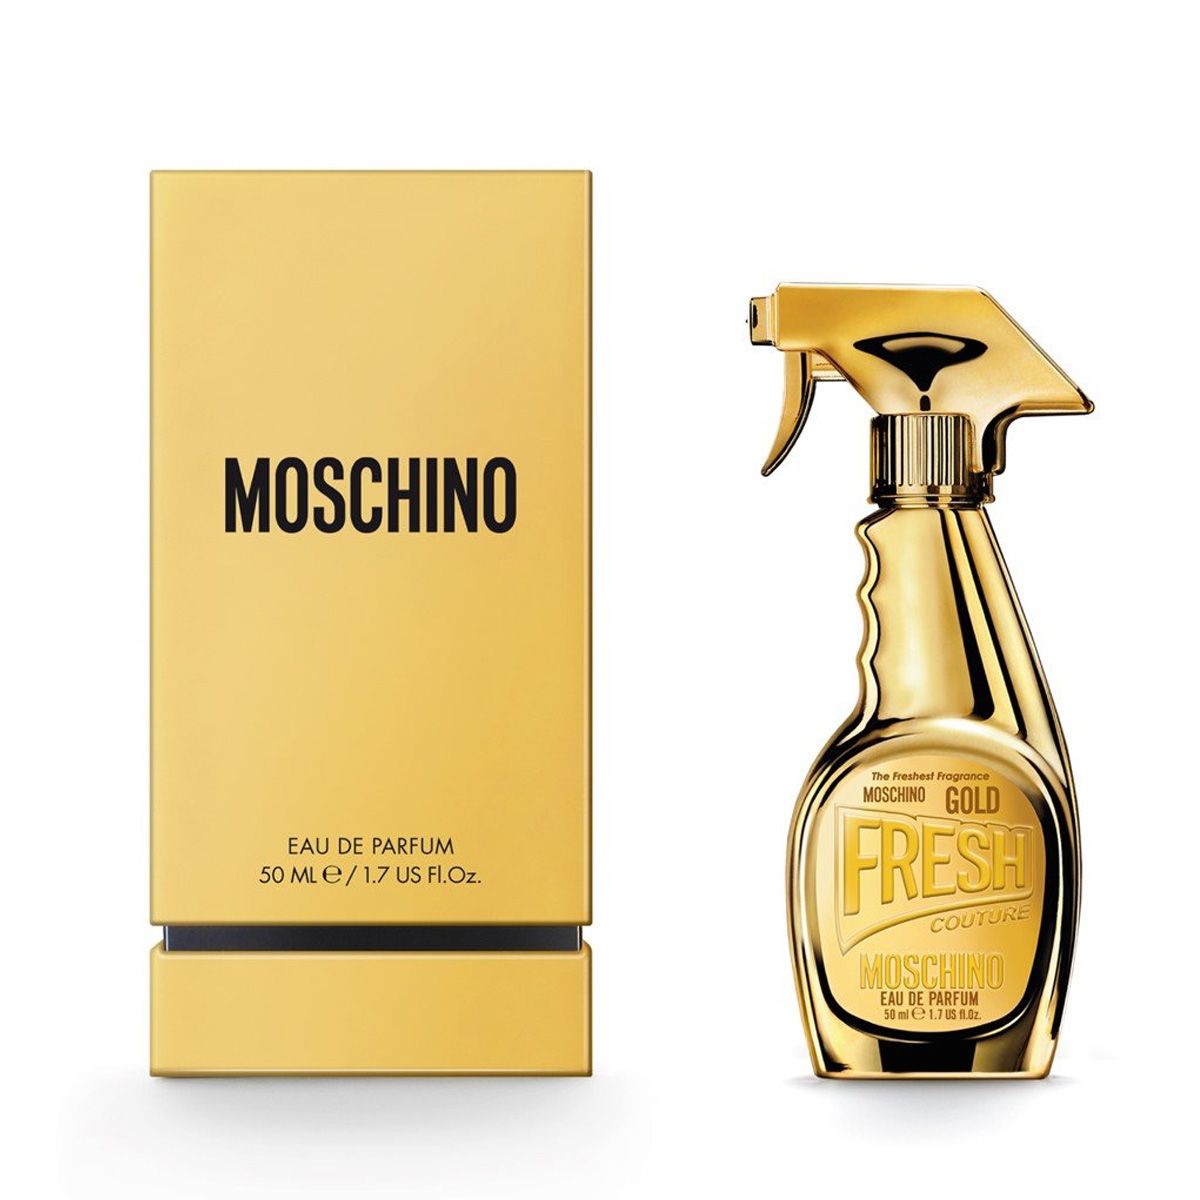  Moschino Gold Fresh Couture 